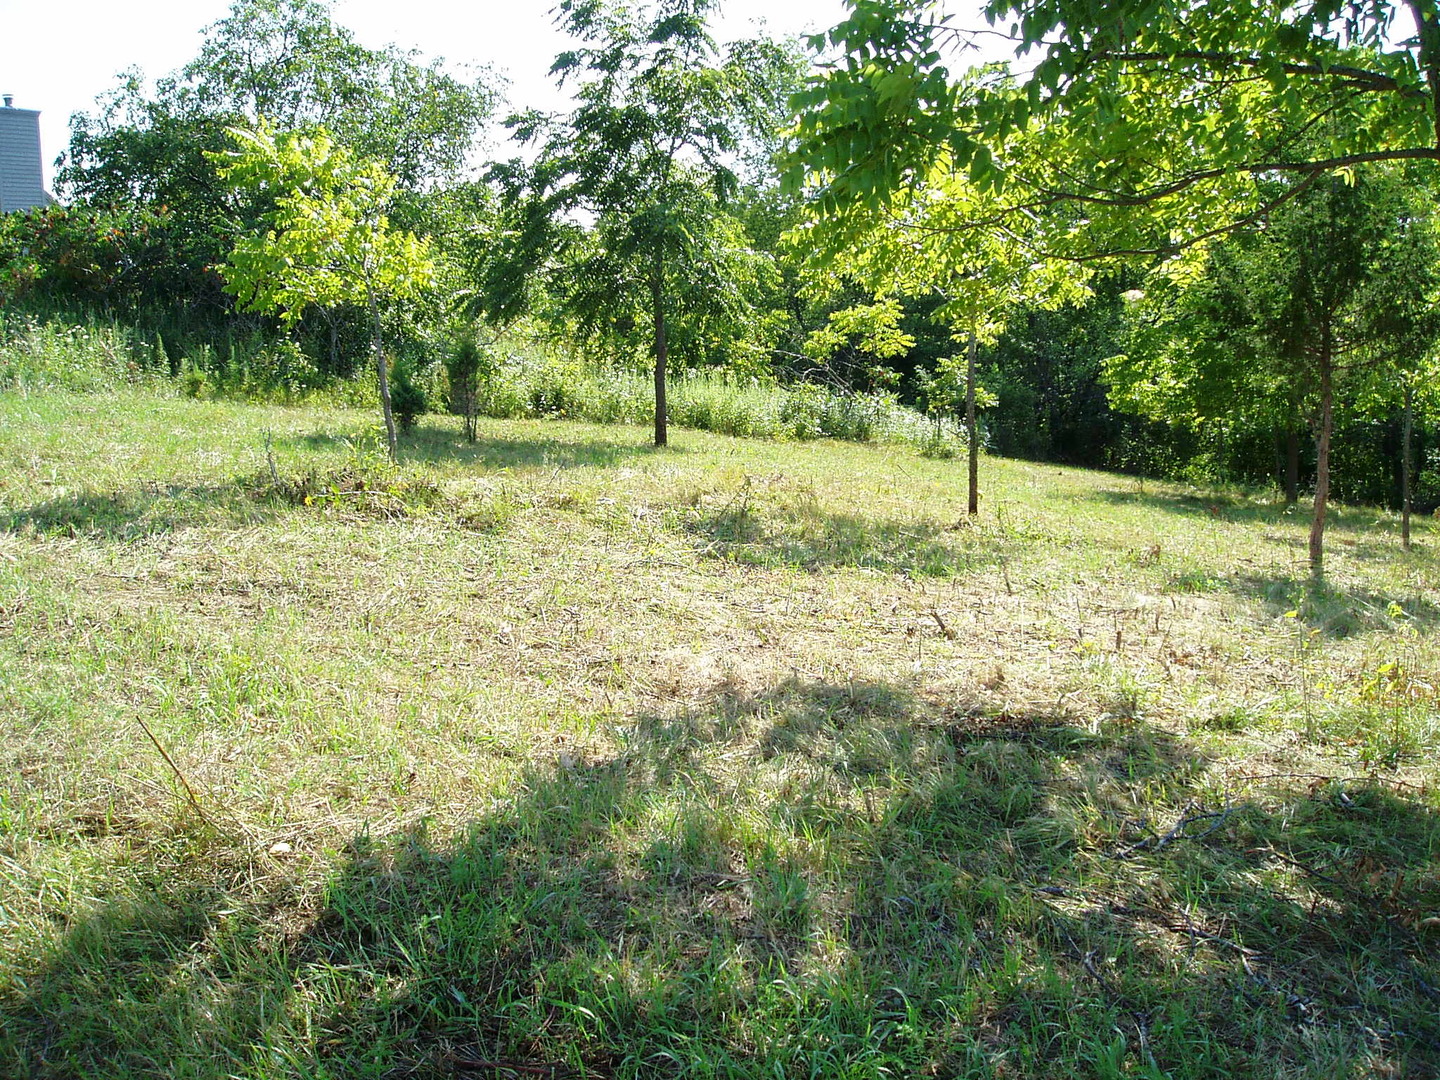 a view of backyard of green space